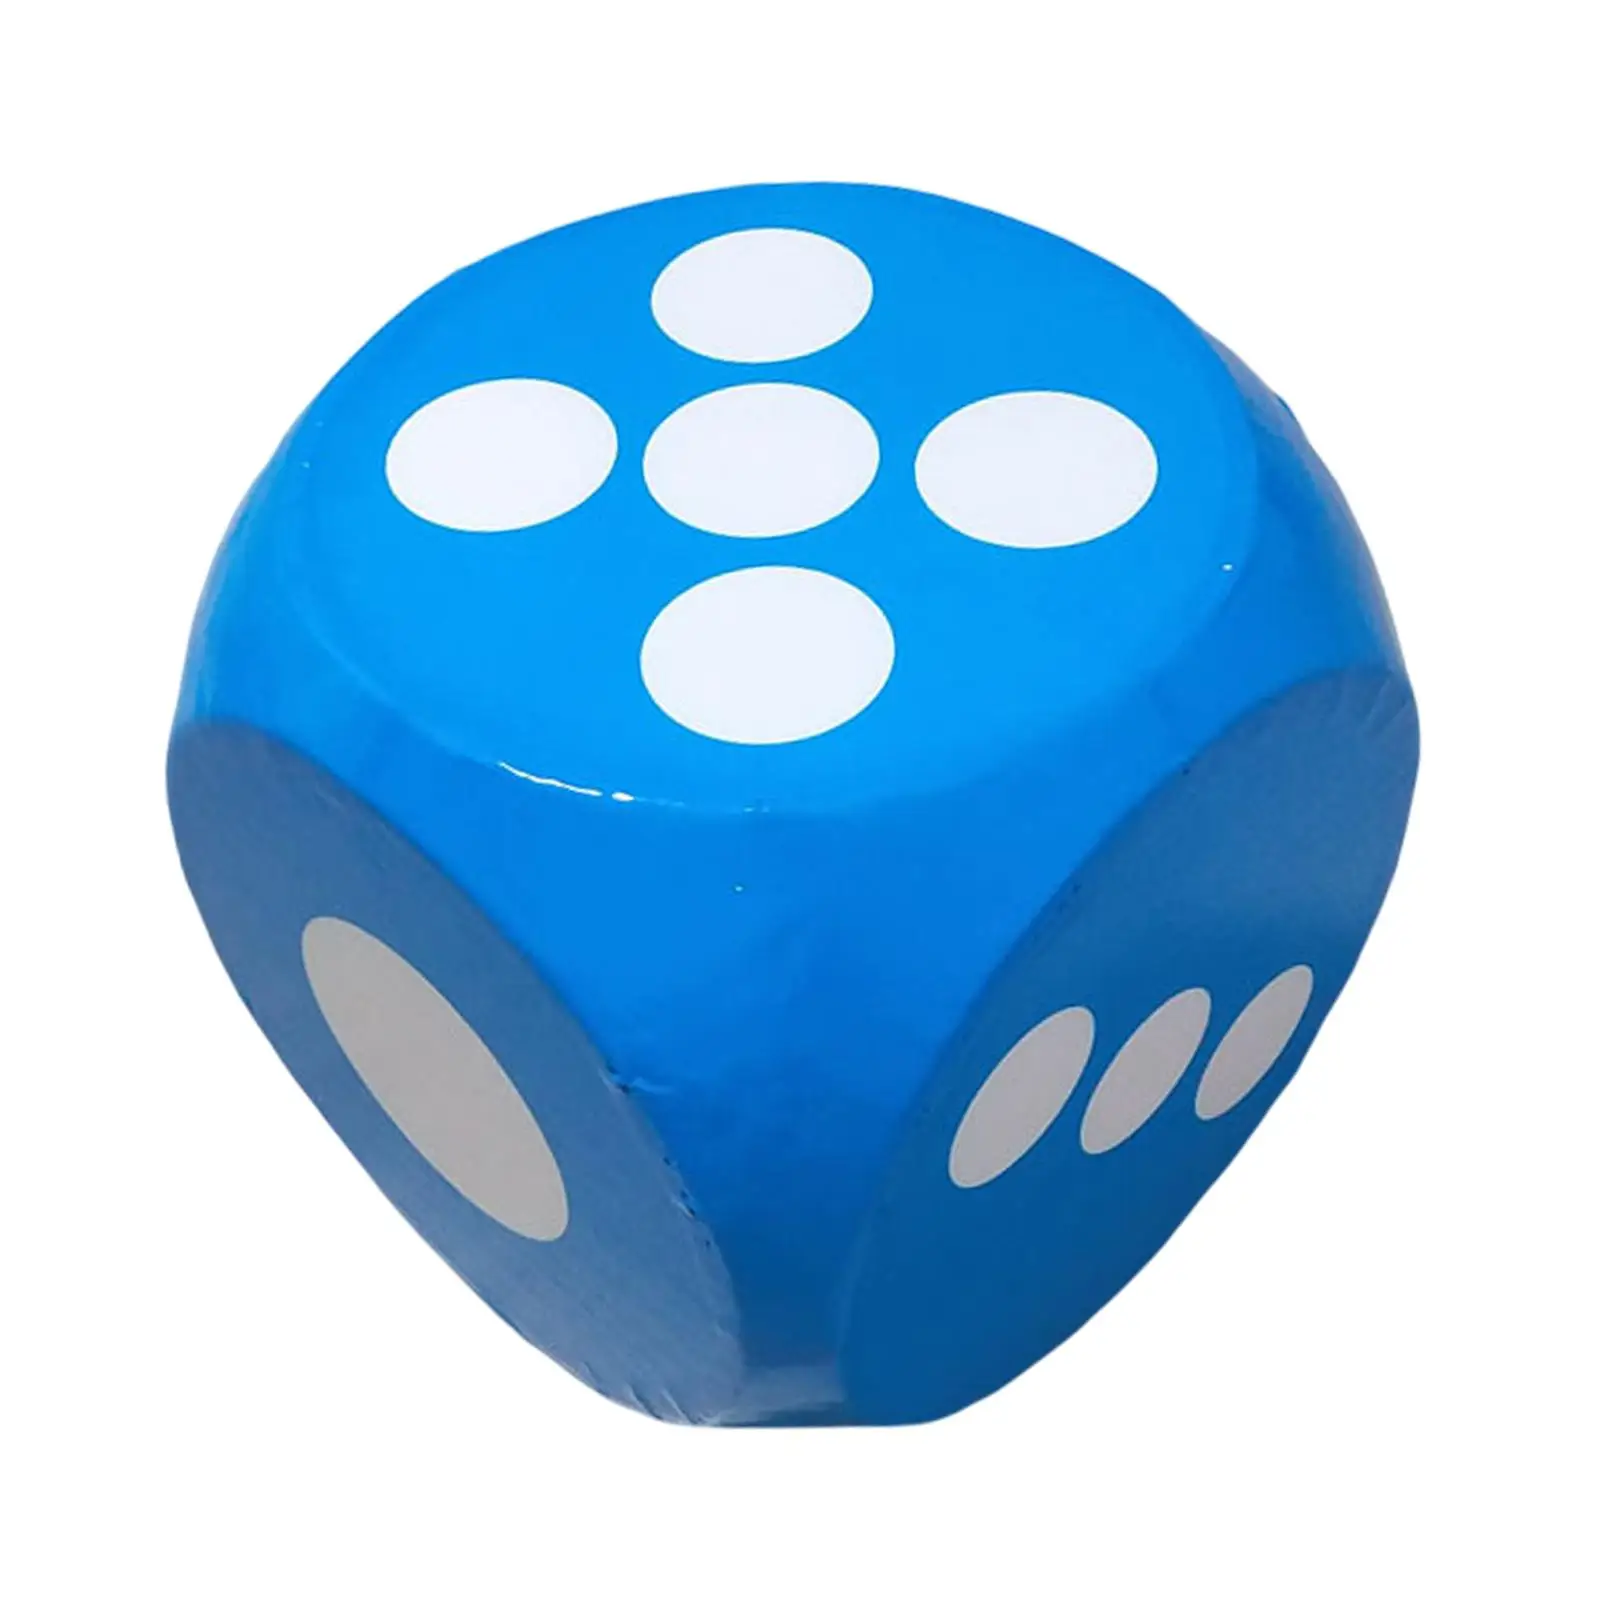 Foam Dice Big Square Blocks 5.9 inch Large Dice Cubes Party Favors and Supplies